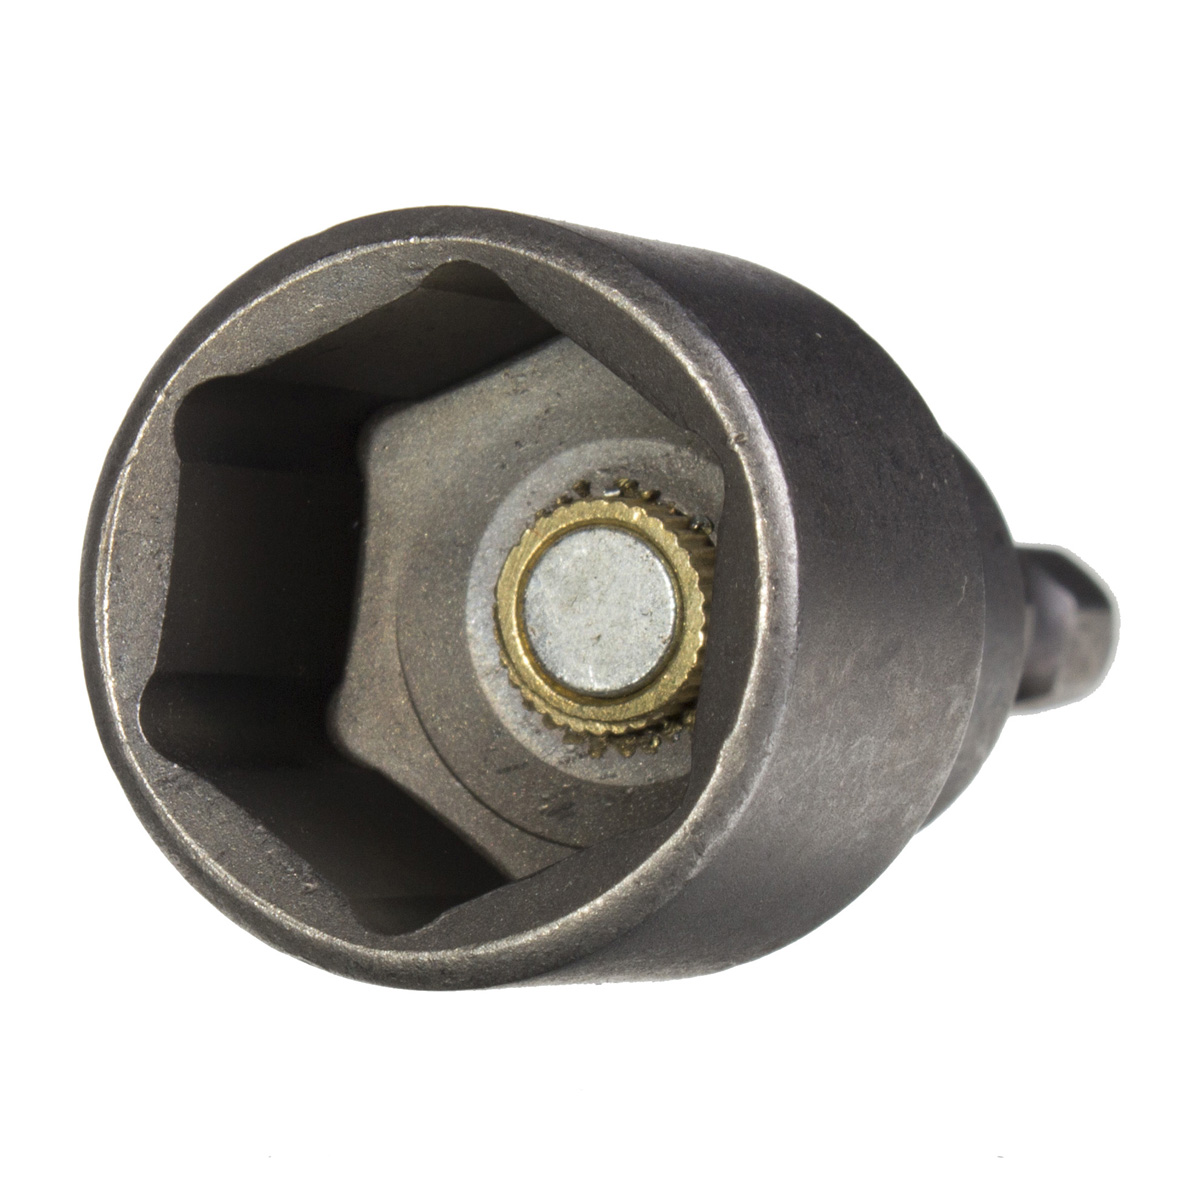 65mm-14-Inch-Hex-Socket-Magnetic-Nut-Driver-Setter-6mm-19mm-Drill-Bit-Adapter-996527-5